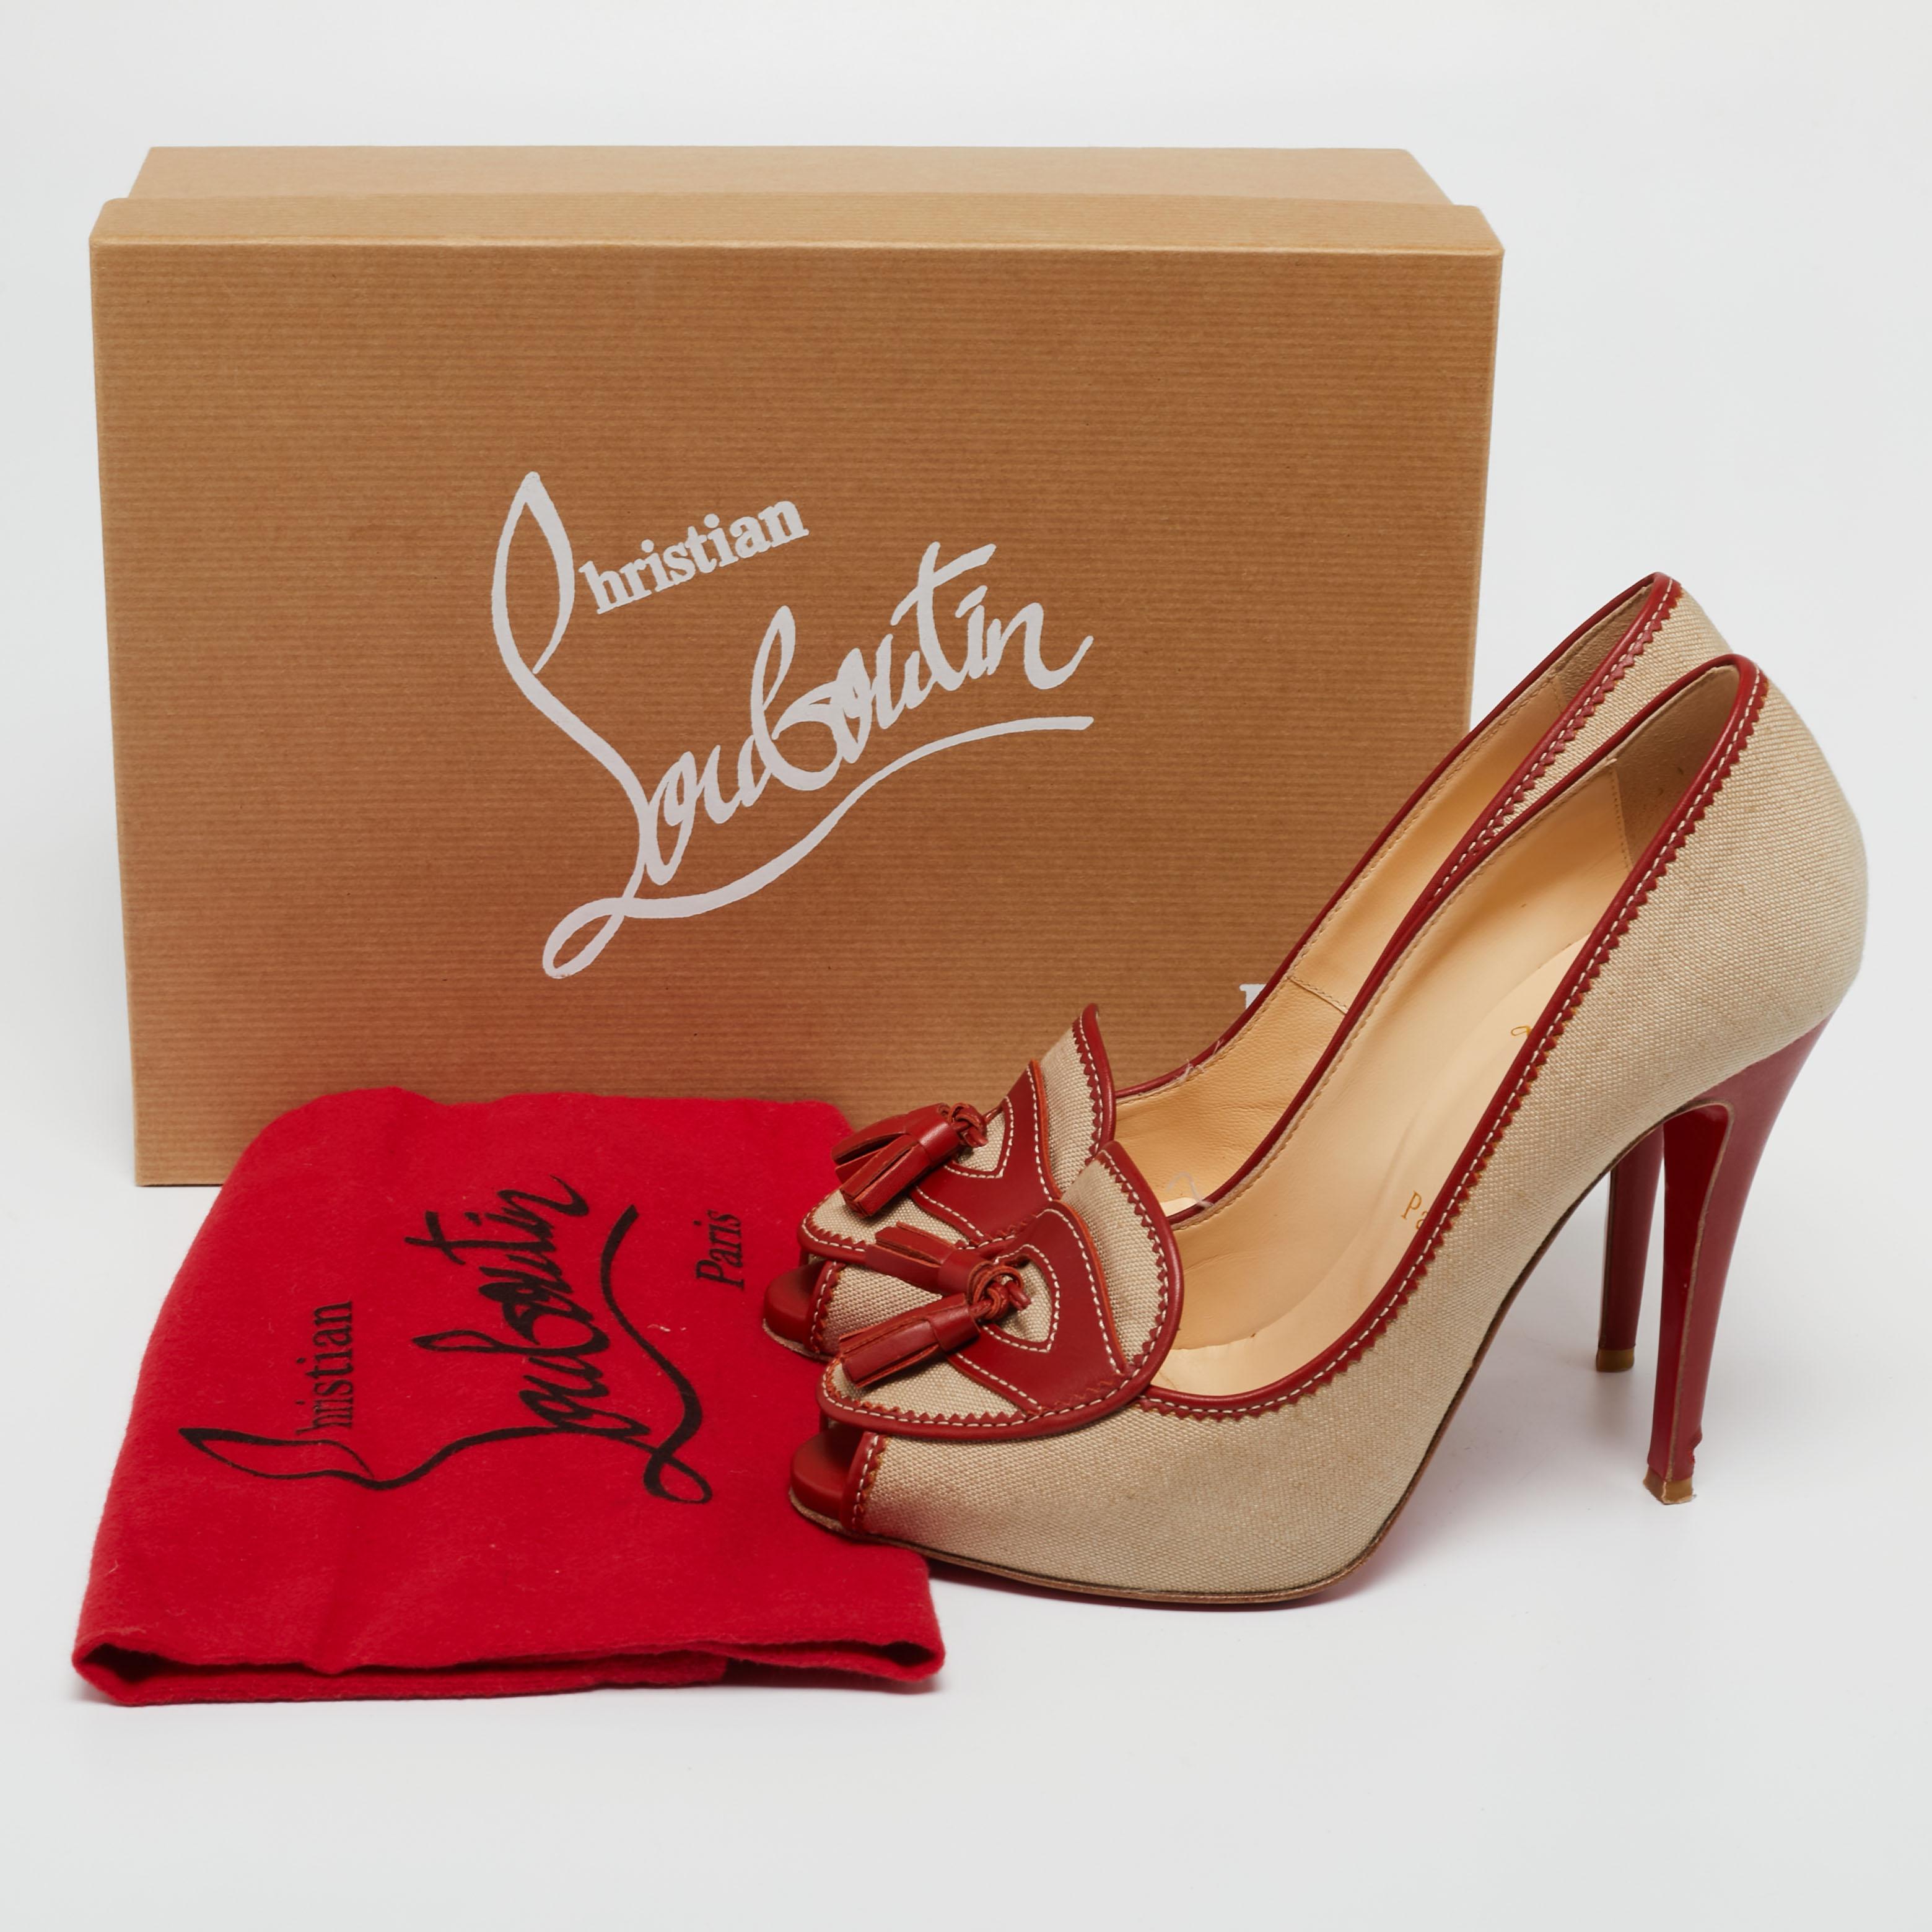 Christian Louboutin Canvas and Leather Tassel Campus Loafer Pumps Size 37 4